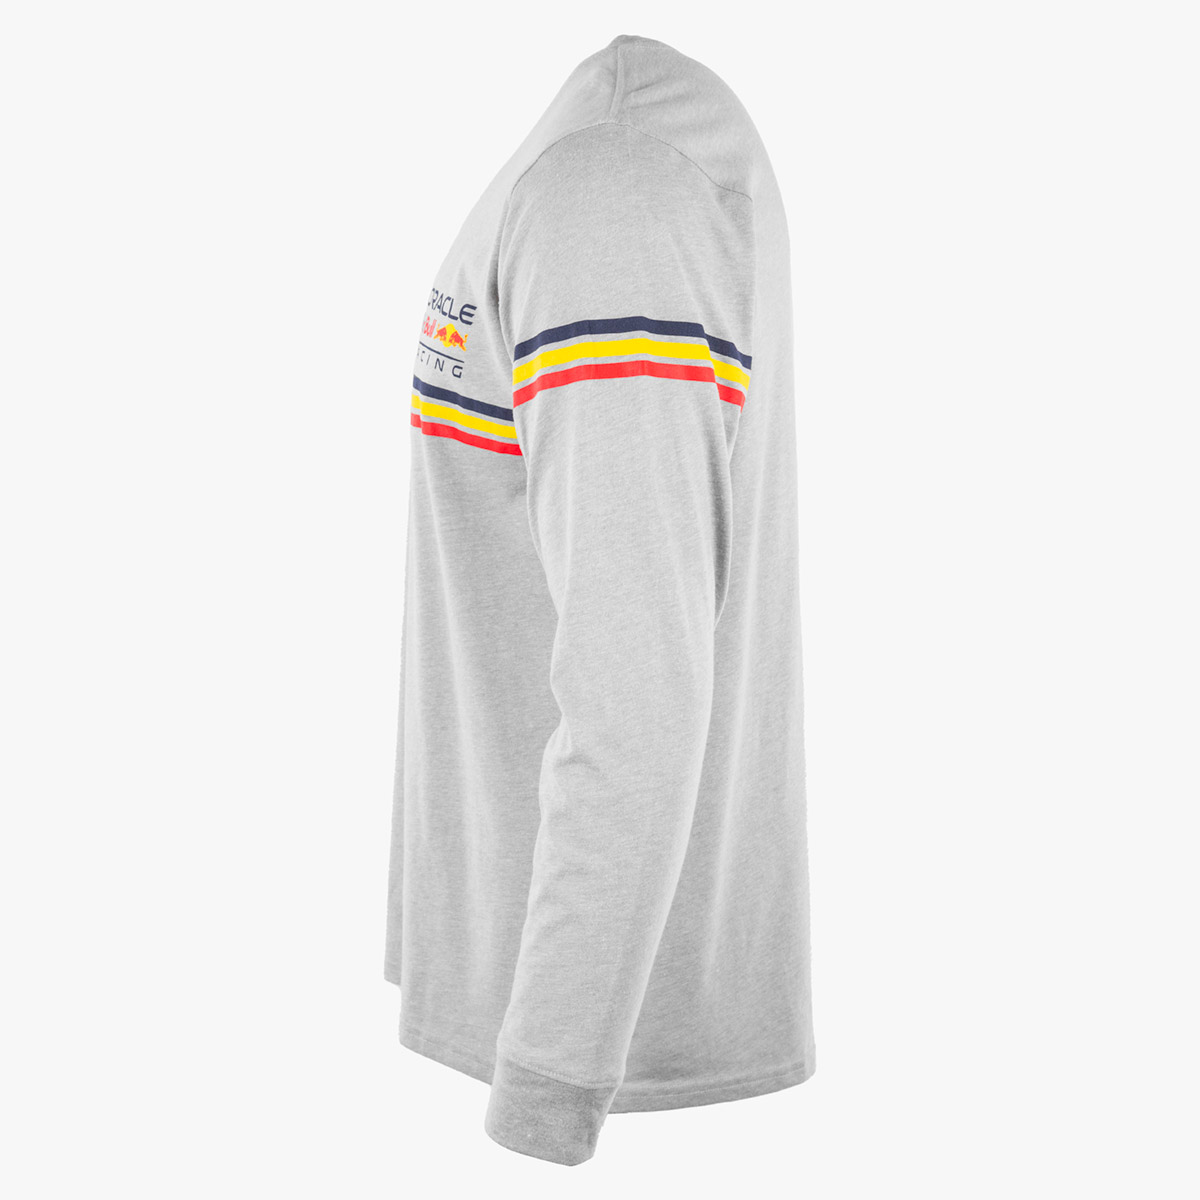 Red Bull Longsleeve Crewneck Tee with Racer Stripes image number 2